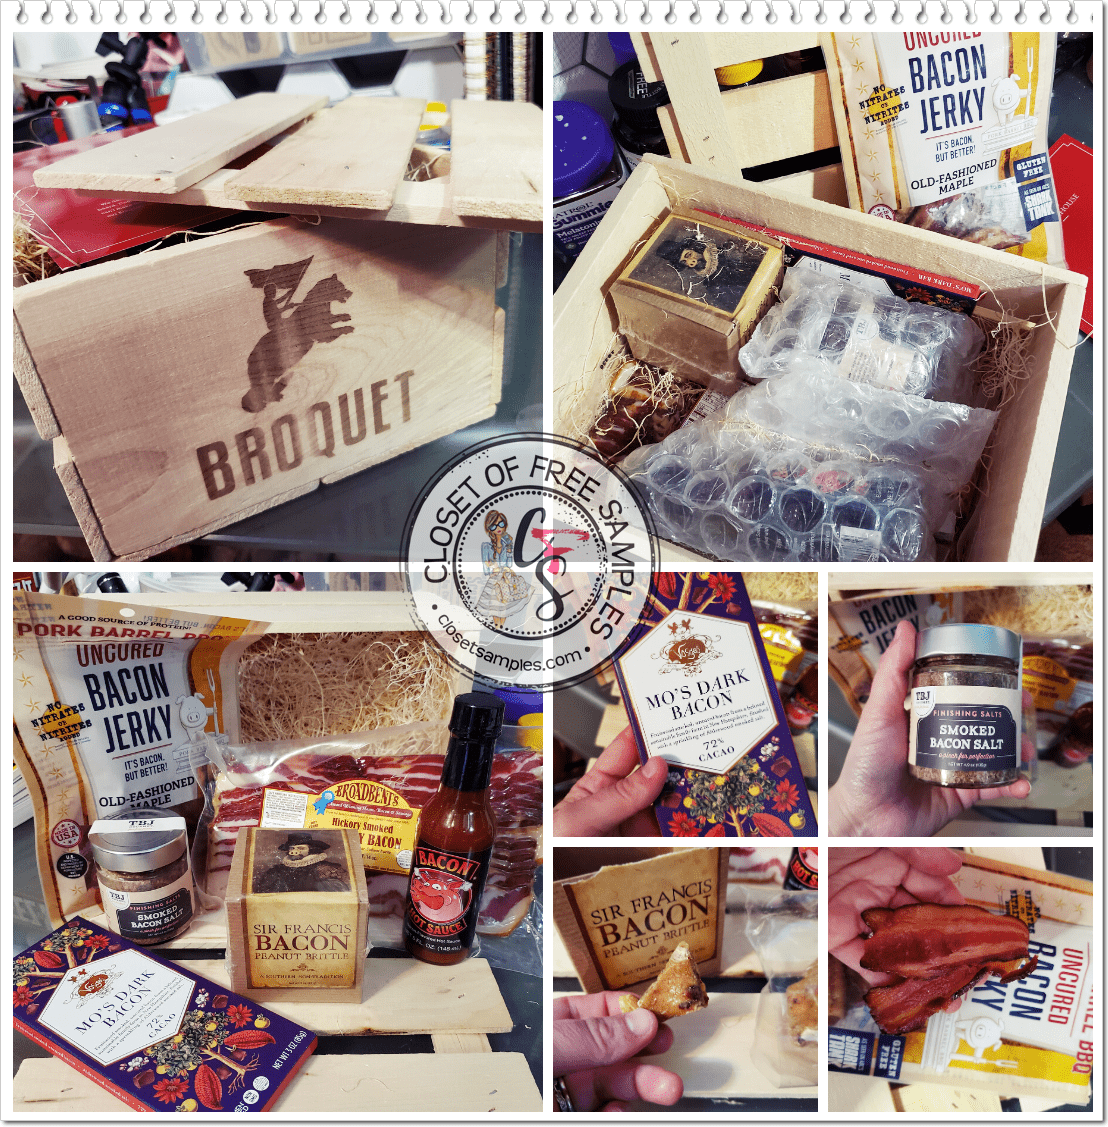 Breakfast for Dinner with Broquet Gift Crates! #Review